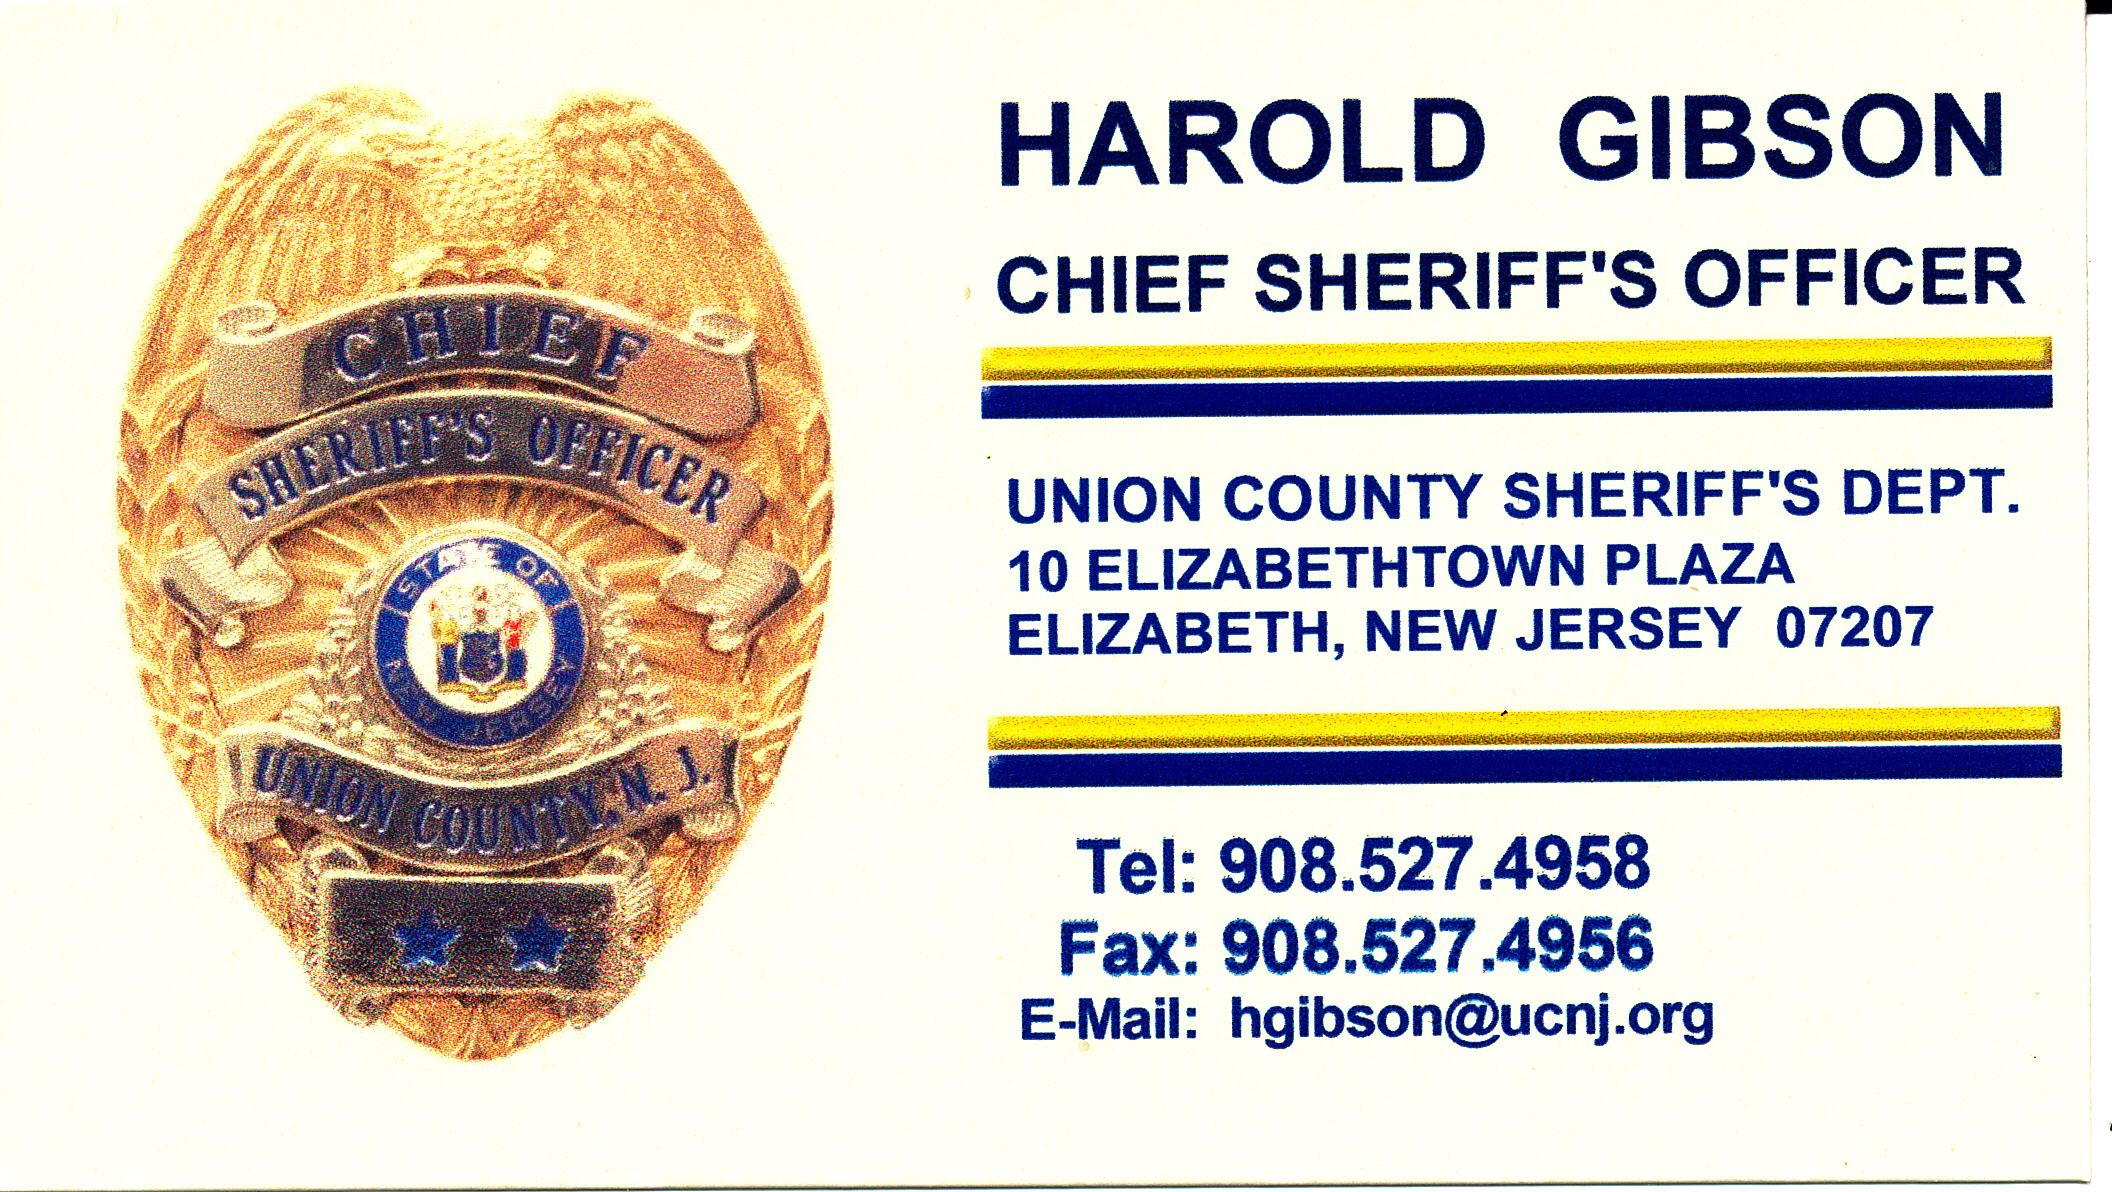 Harold Gibson, Chief Sheriff's Officer